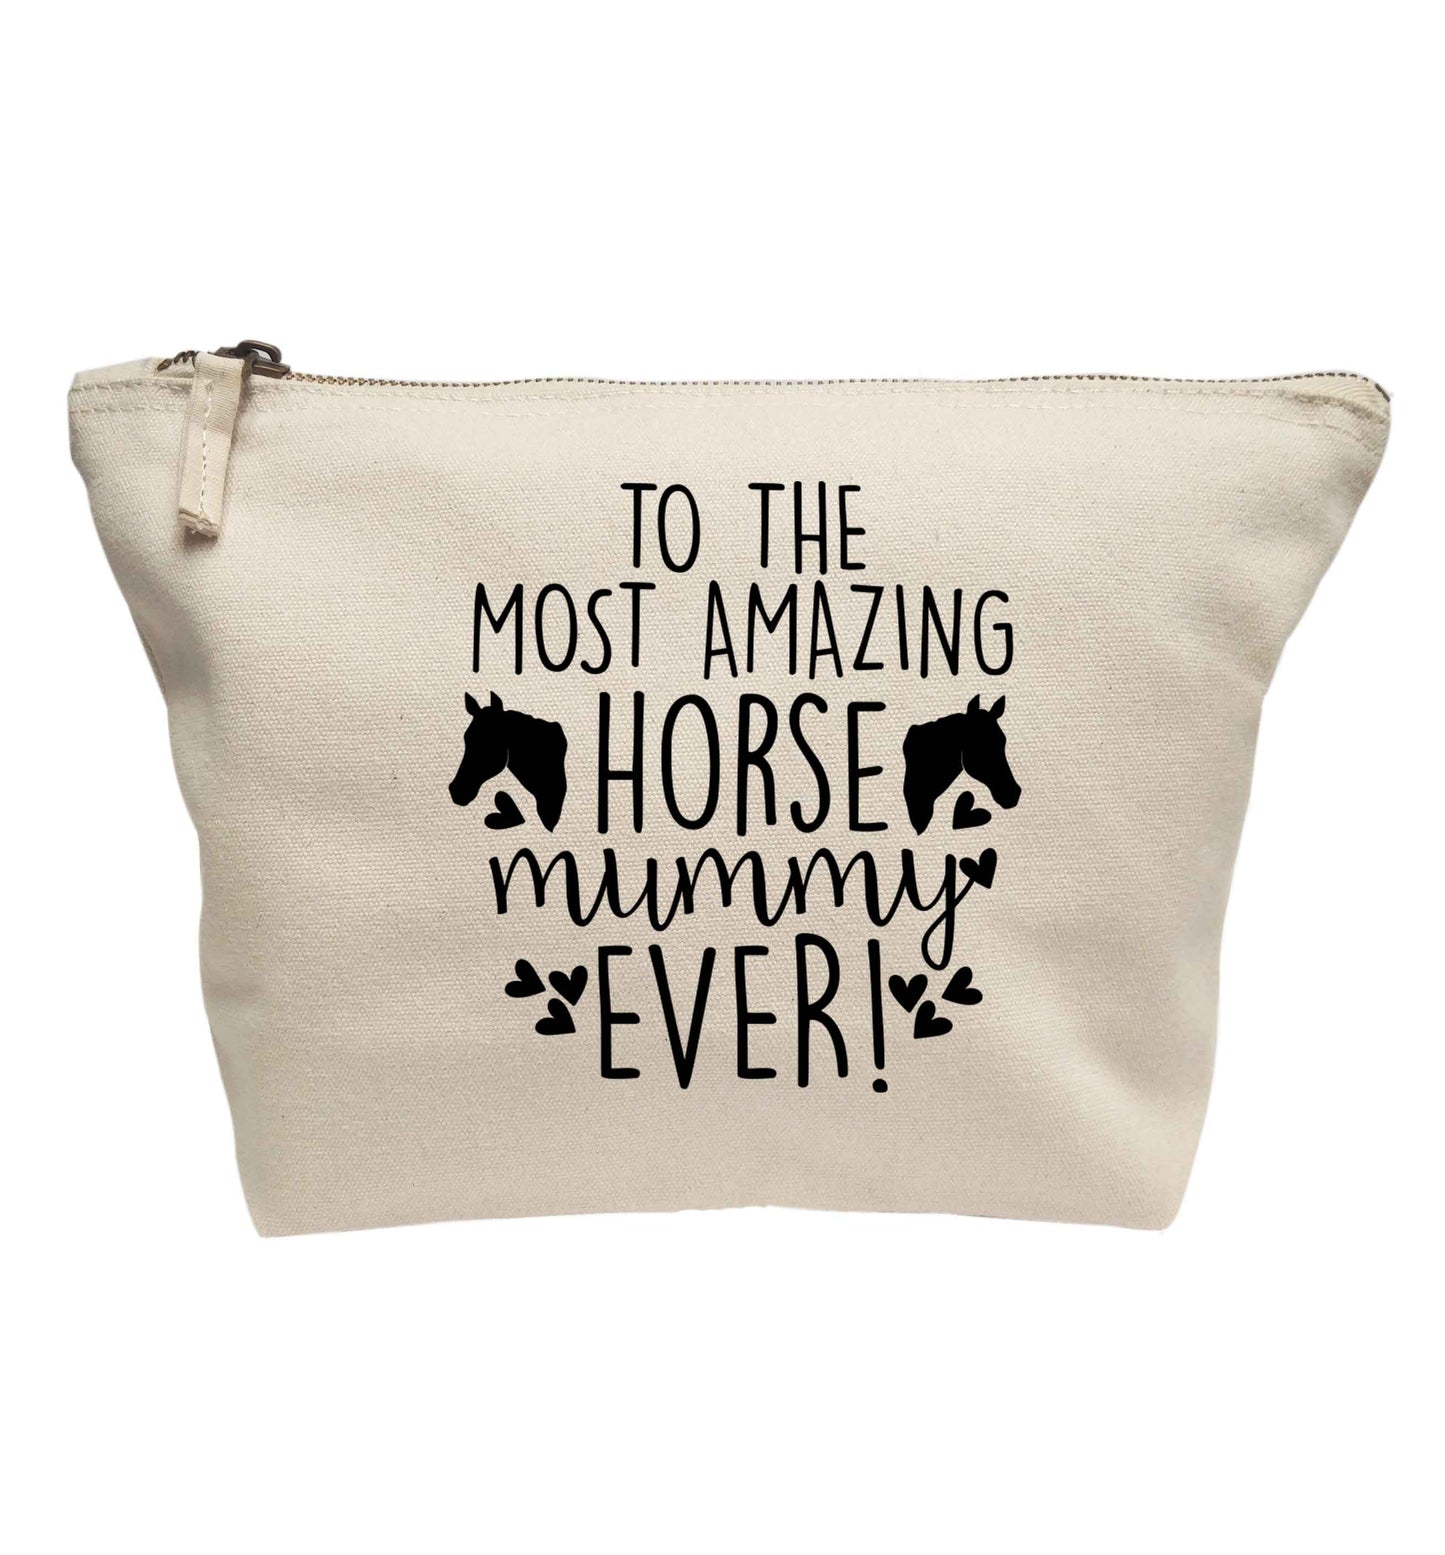 To the most amazing horse mummy ever! | Makeup / wash bag